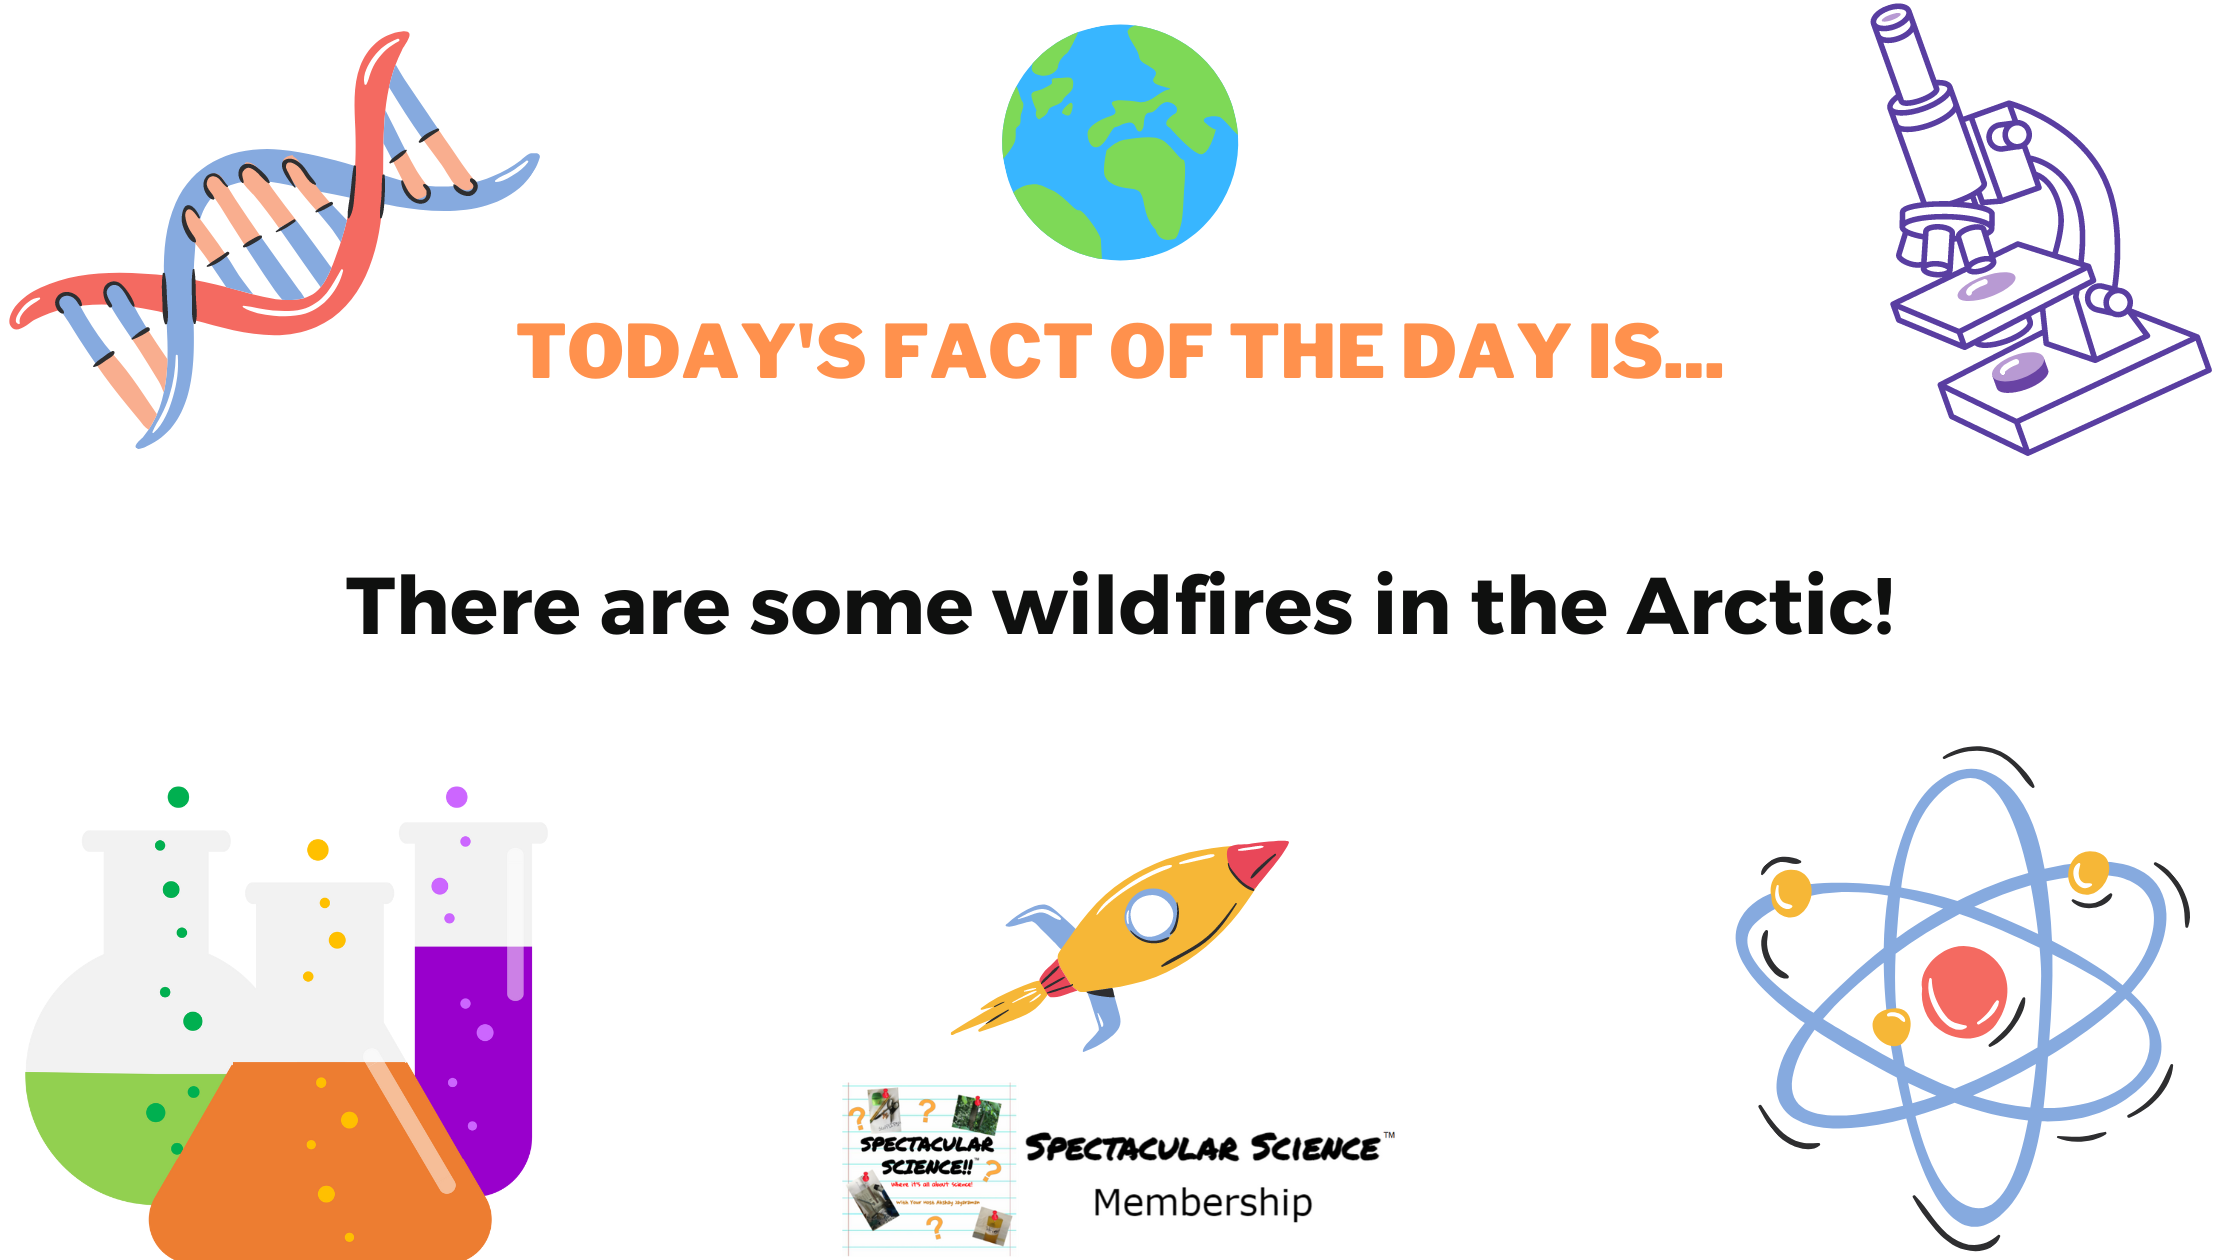 Fact of the Day Image November 9th